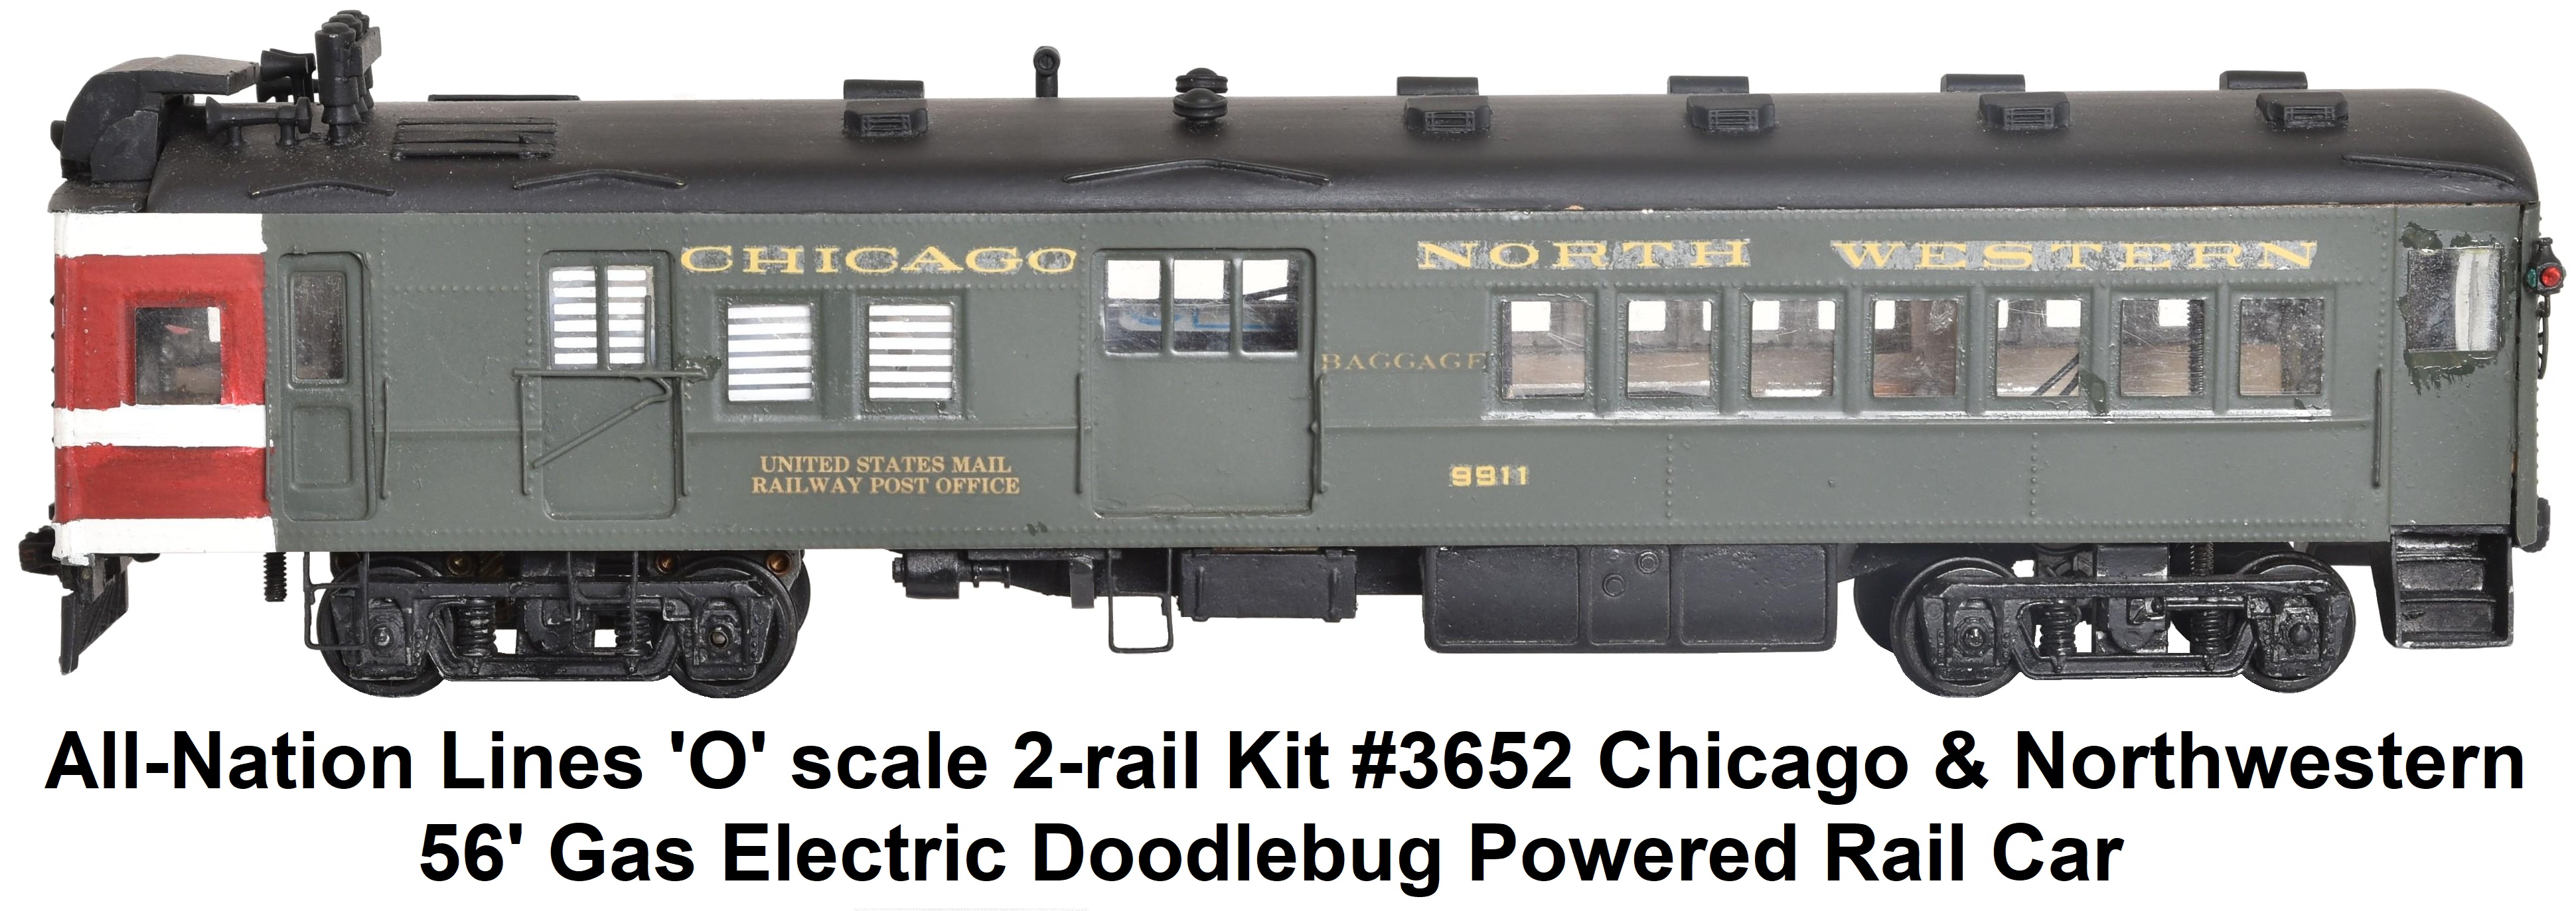 All-Nation Lines 'O' scale 2-rail kit #3652 Chicago and Northwestern 56' gas electric Doodlebug powered rail car